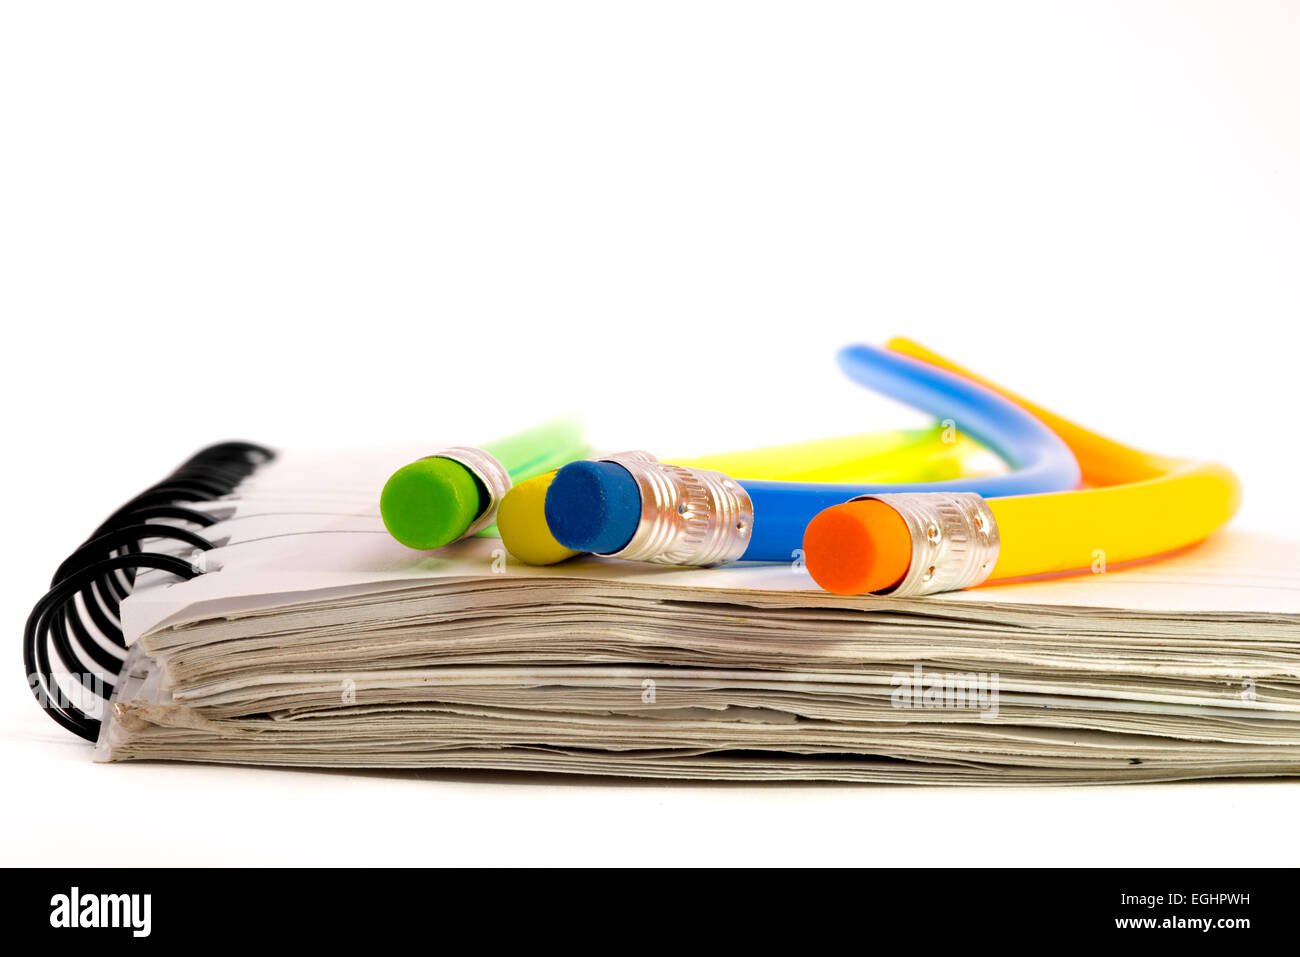 Four colorful pencils that are all strangely bend, lying on a notebook. Stock Photo